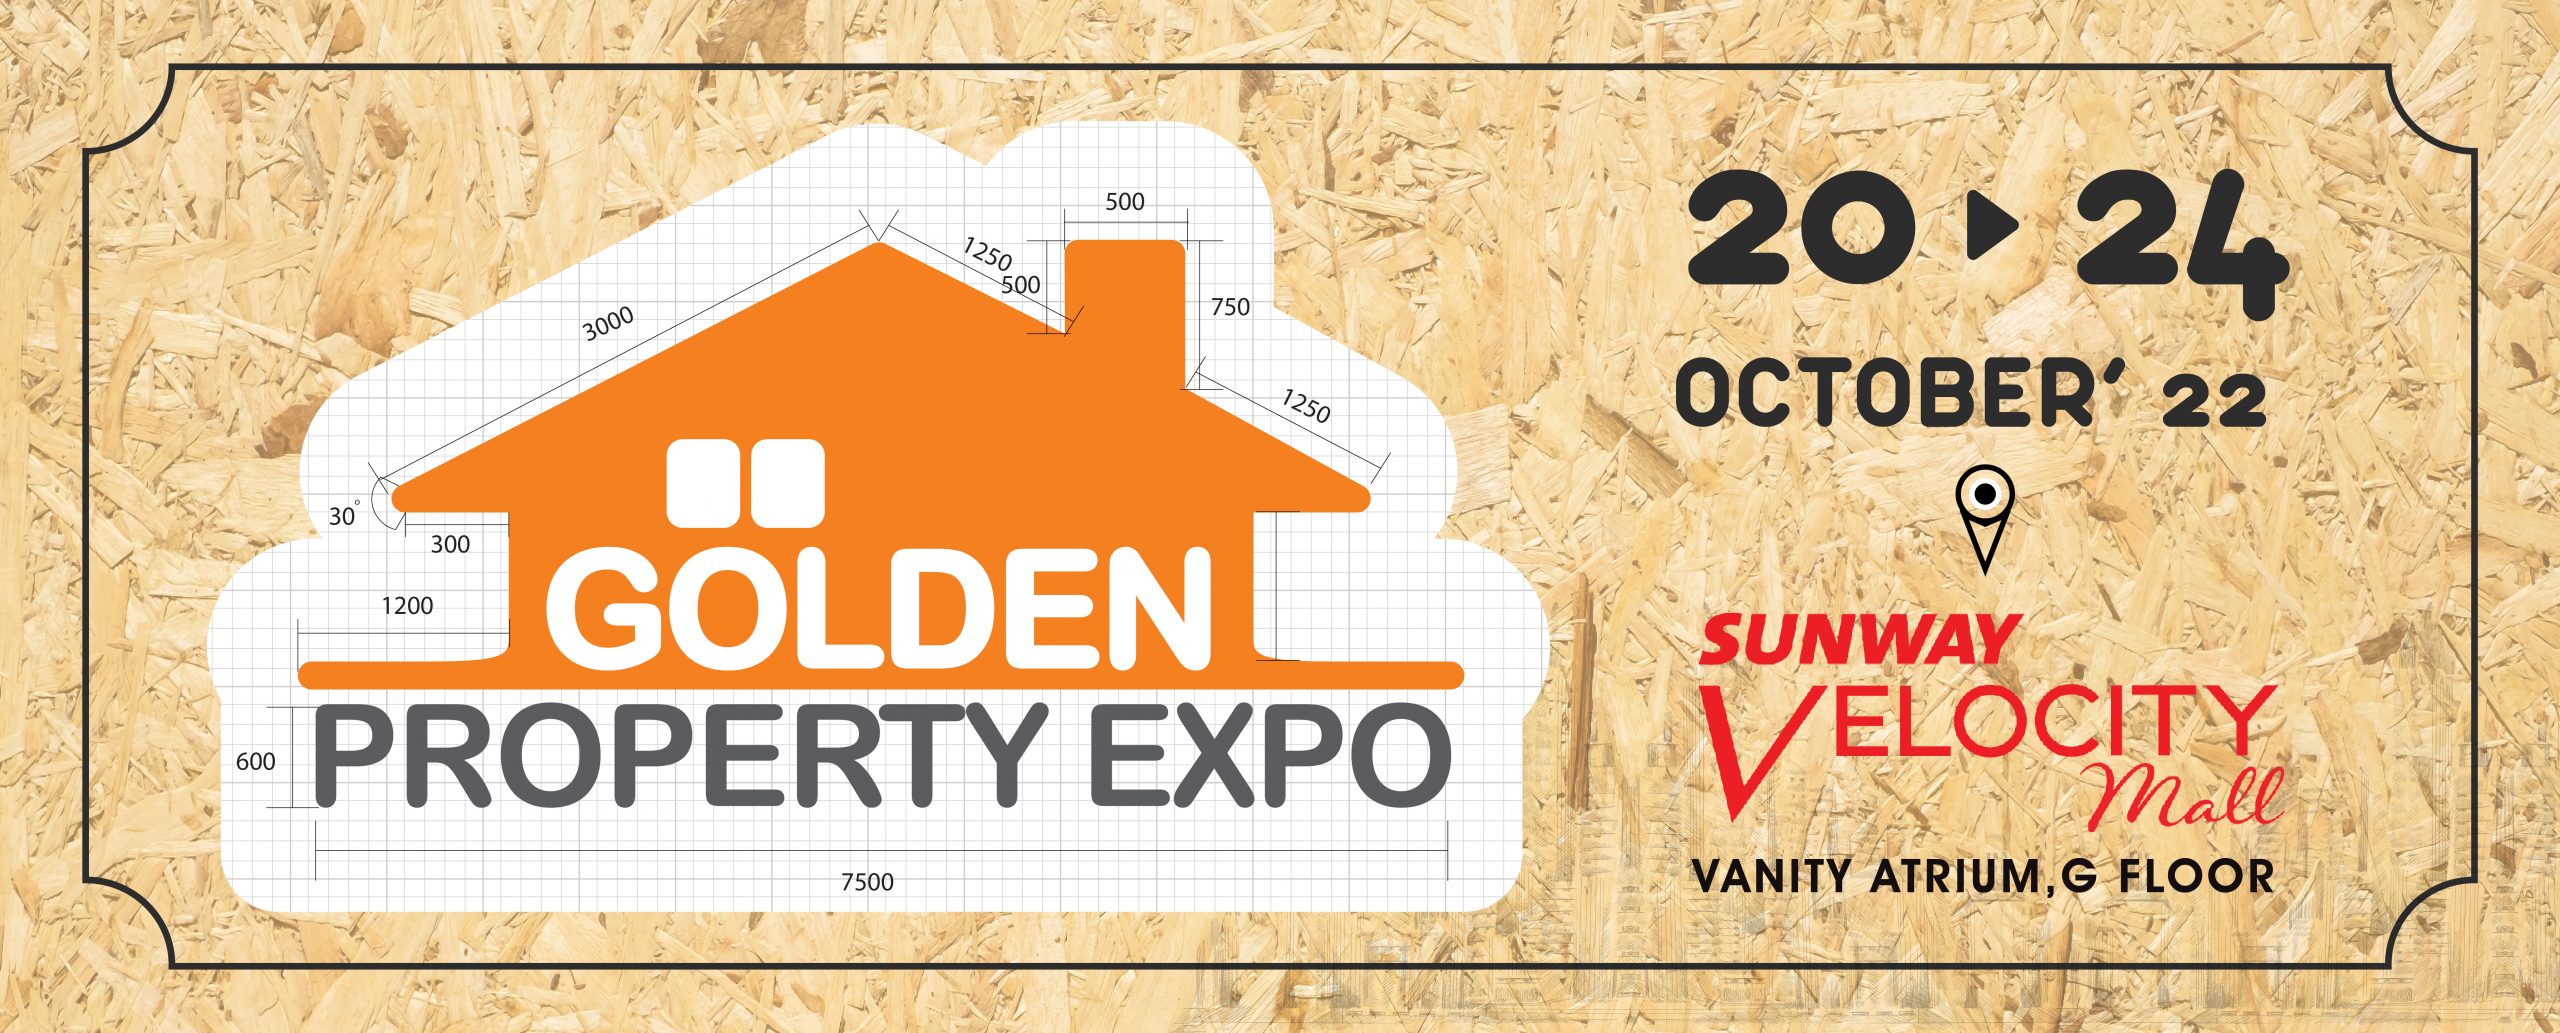 GOLDEN PROPERTY EXPO AT SUNWAY VELOCITY MALL (20-24 OCTOBER 2022)